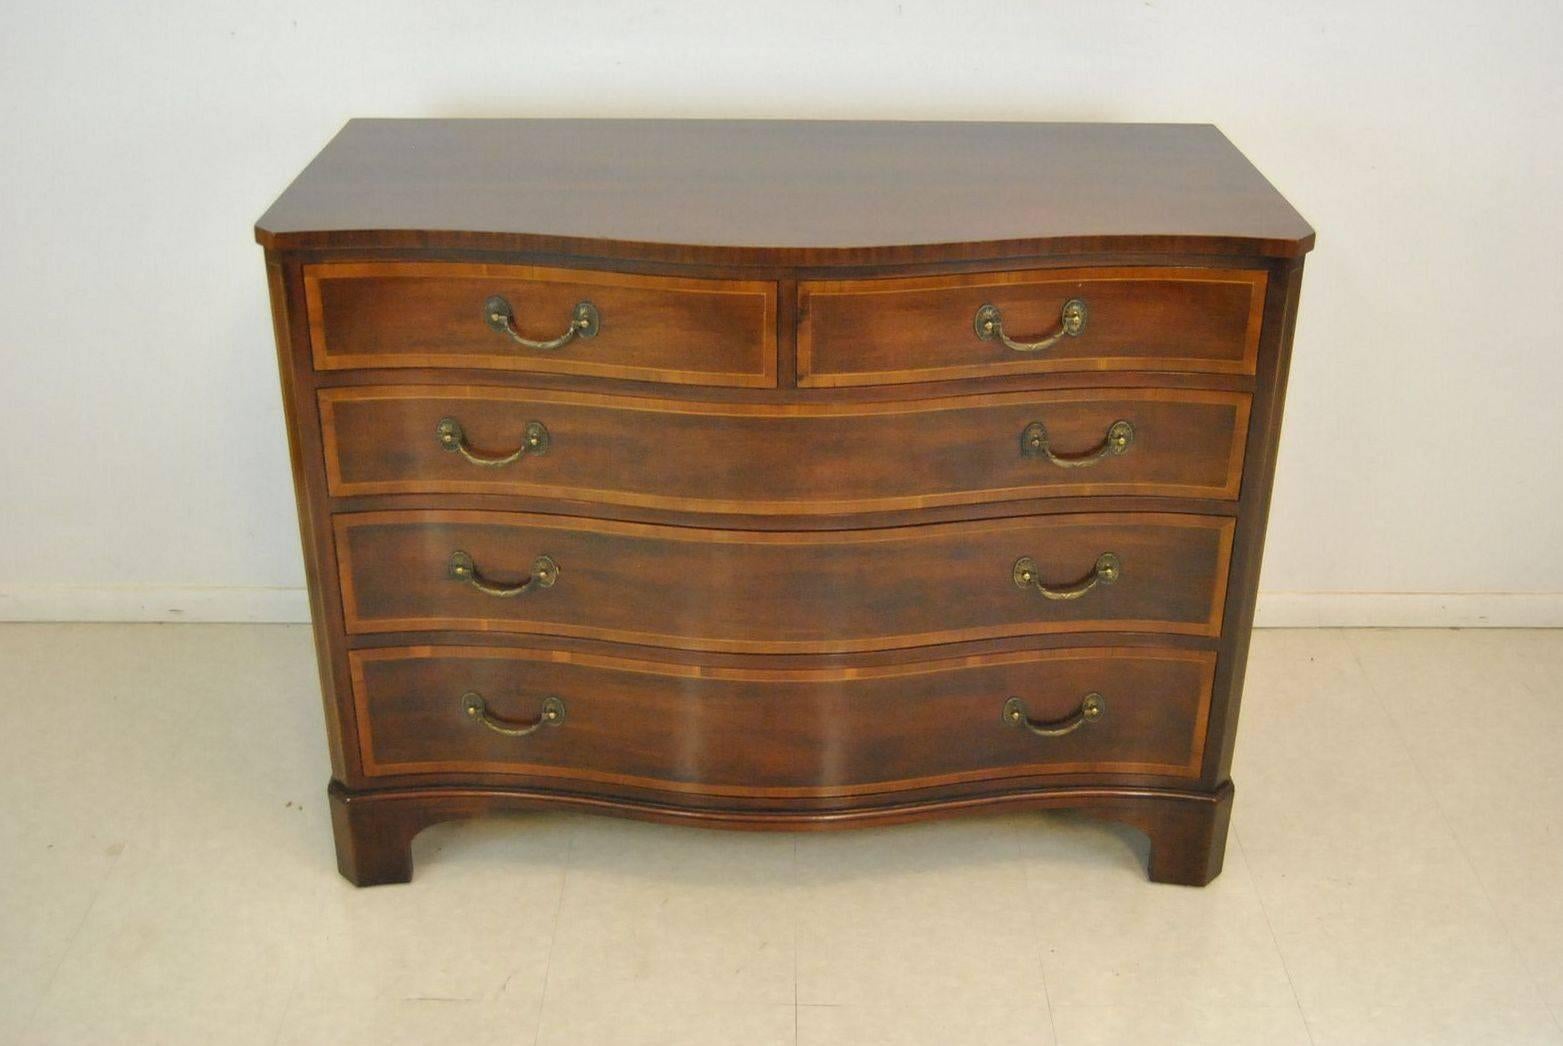 A serpentine front mahogany chest/dresser made by Kindel Furniture. This chest has a nice hand done inlay pattern on the sides. The drawers have the same fine line inlay with a larger border done in a different tone. The chest has its original brass